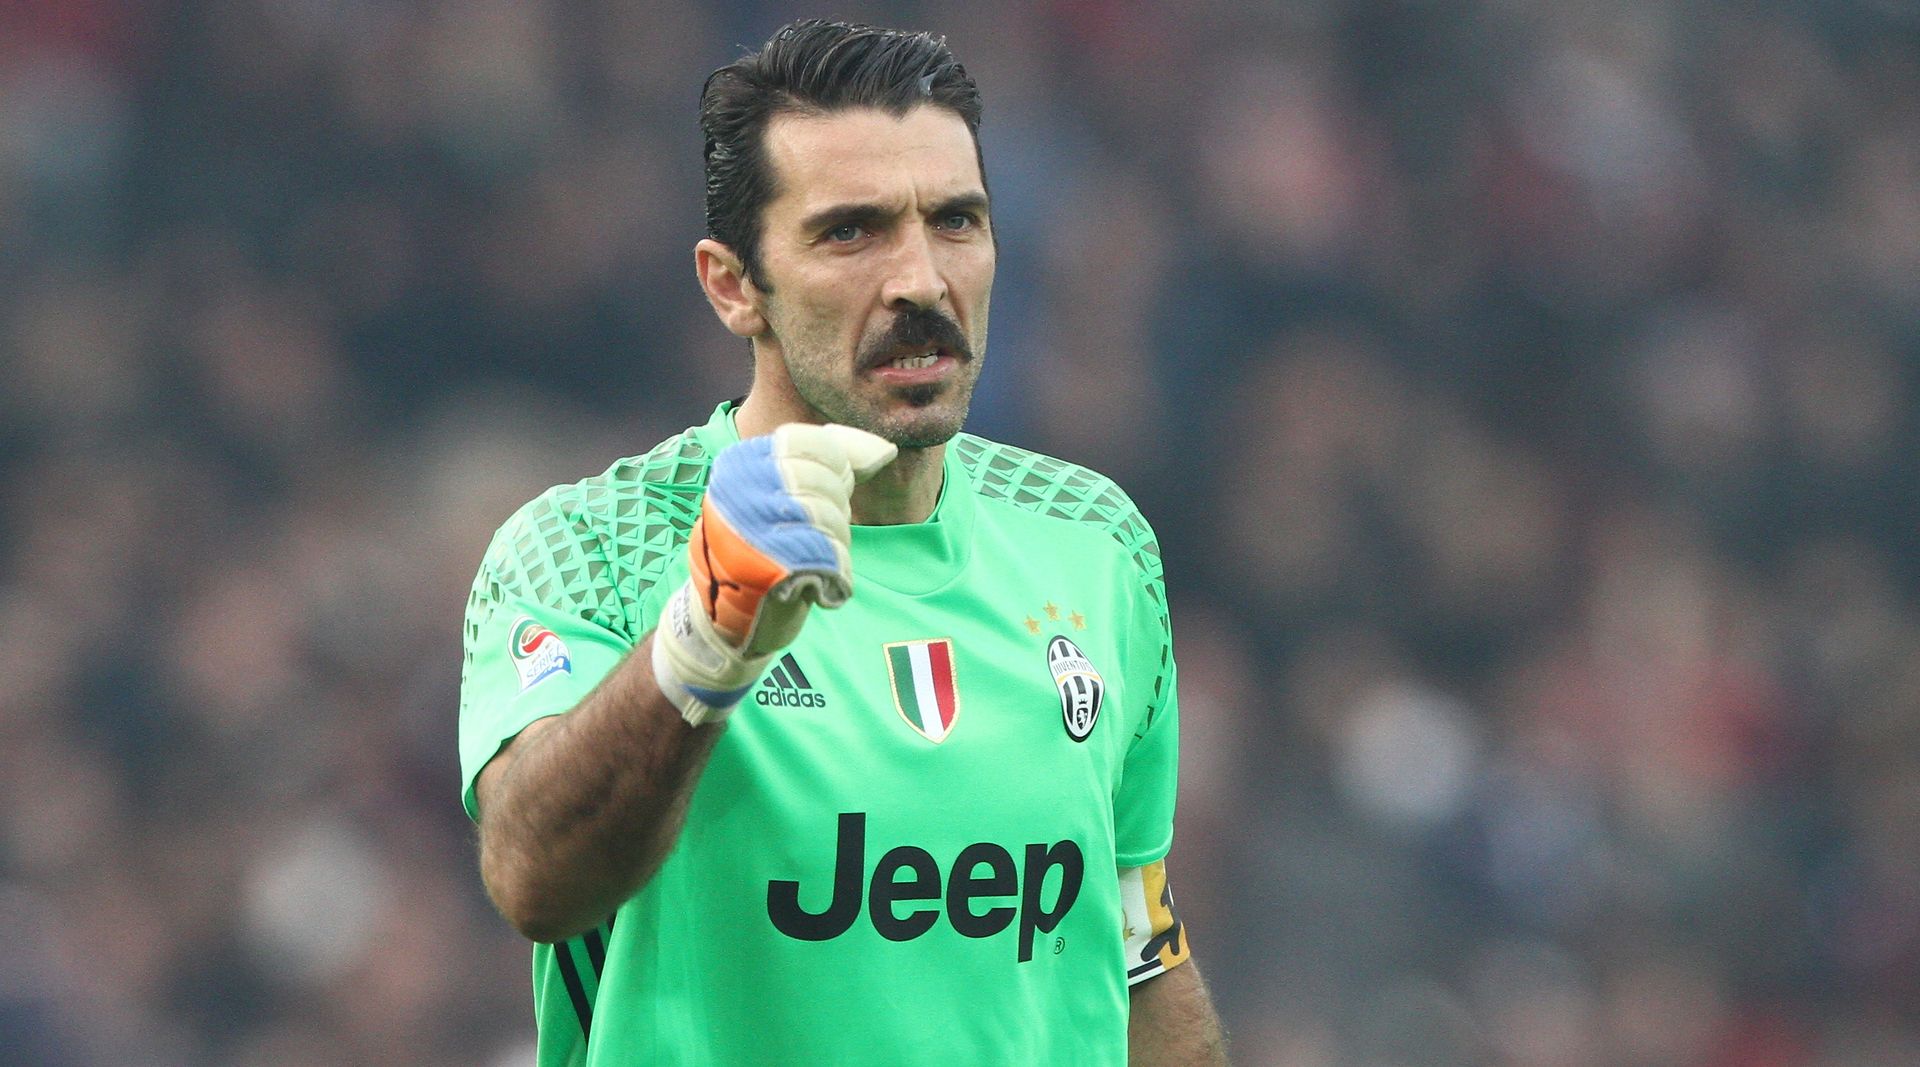 <p>                     By the time he left Juventus in 2018, Gianluigi Buffon had been one of the world’s best goalkeepers for the best part of two decades.                   </p>                                      <p>                     Already a two-time Scudetto winner, the 00s yielded even more success for Italy’s 2006 world-champion custodian – most notably seven consecutive Serie A titles from 2012 to 2018.                   </p>